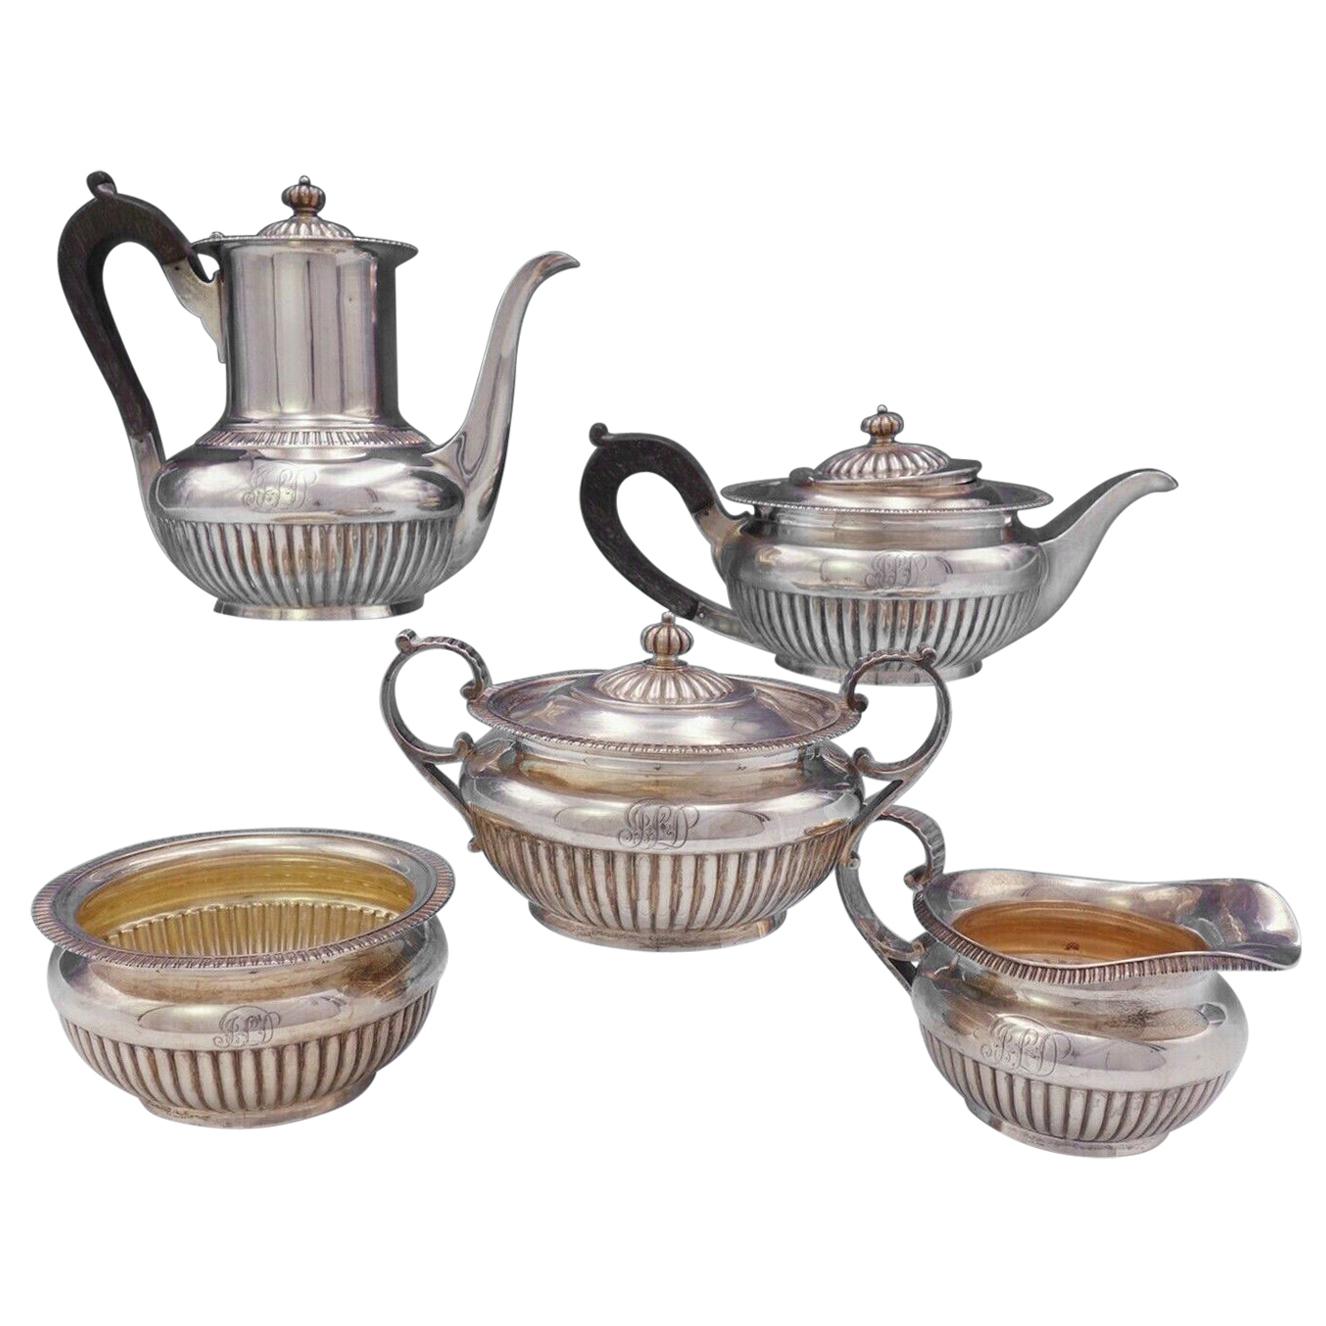 Dominick and Haff Sterling Silver Tea Set 5-Piece with Wood #134, circa 1884